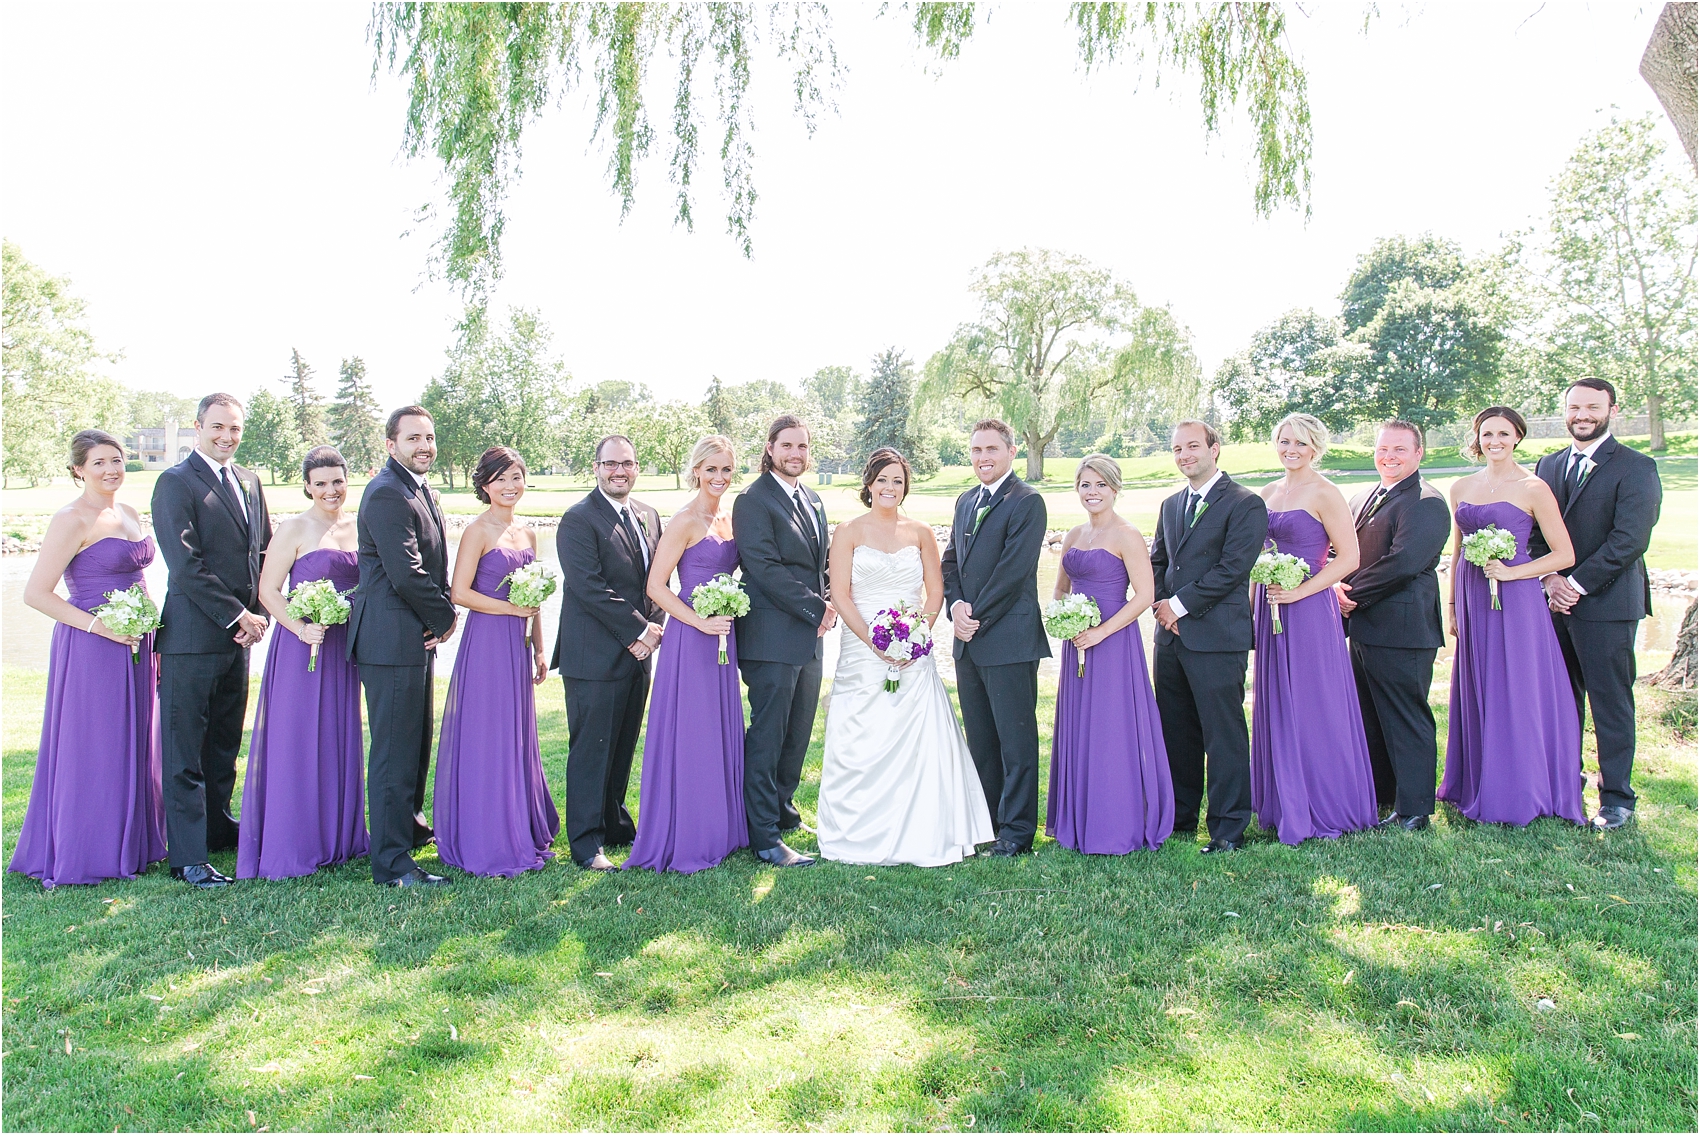 classic-wedding-photos-at-great-oaks-country-club-in-rochester-hills-mi-by-courtney-carolyn-photography_0044.jpg